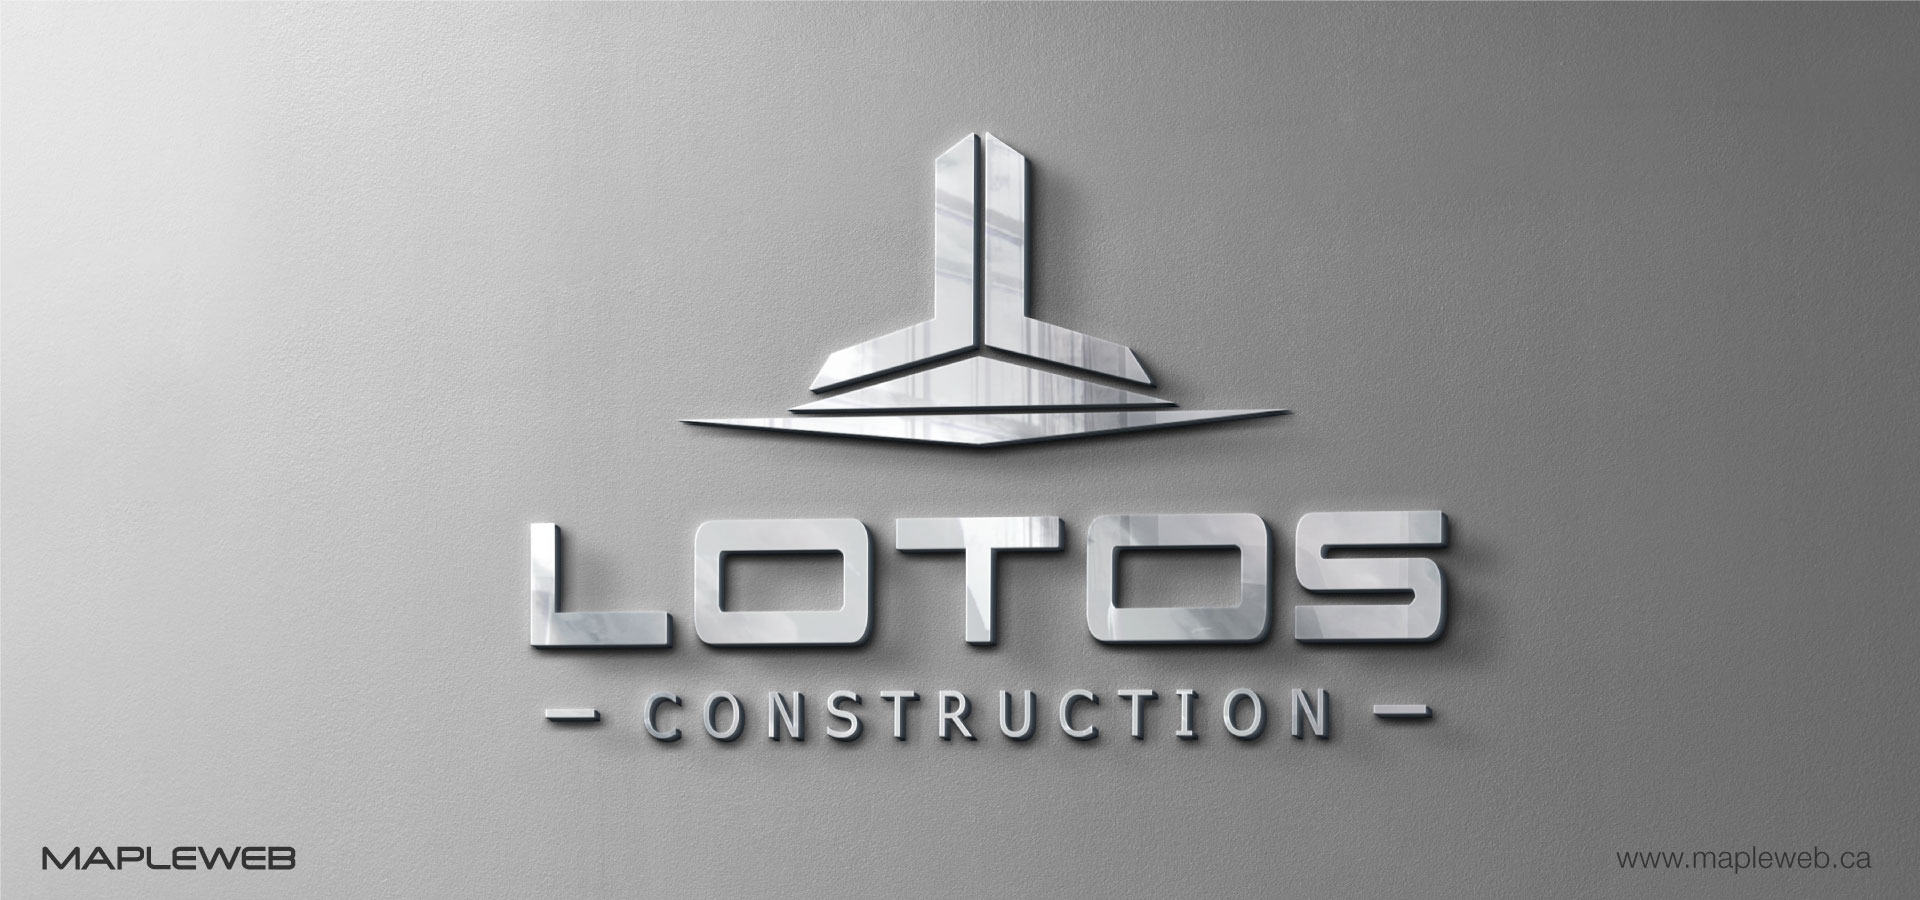 lotos-construction-brand-logo-design-by-mapleweb-vancouver-canada-business-card-box-mock